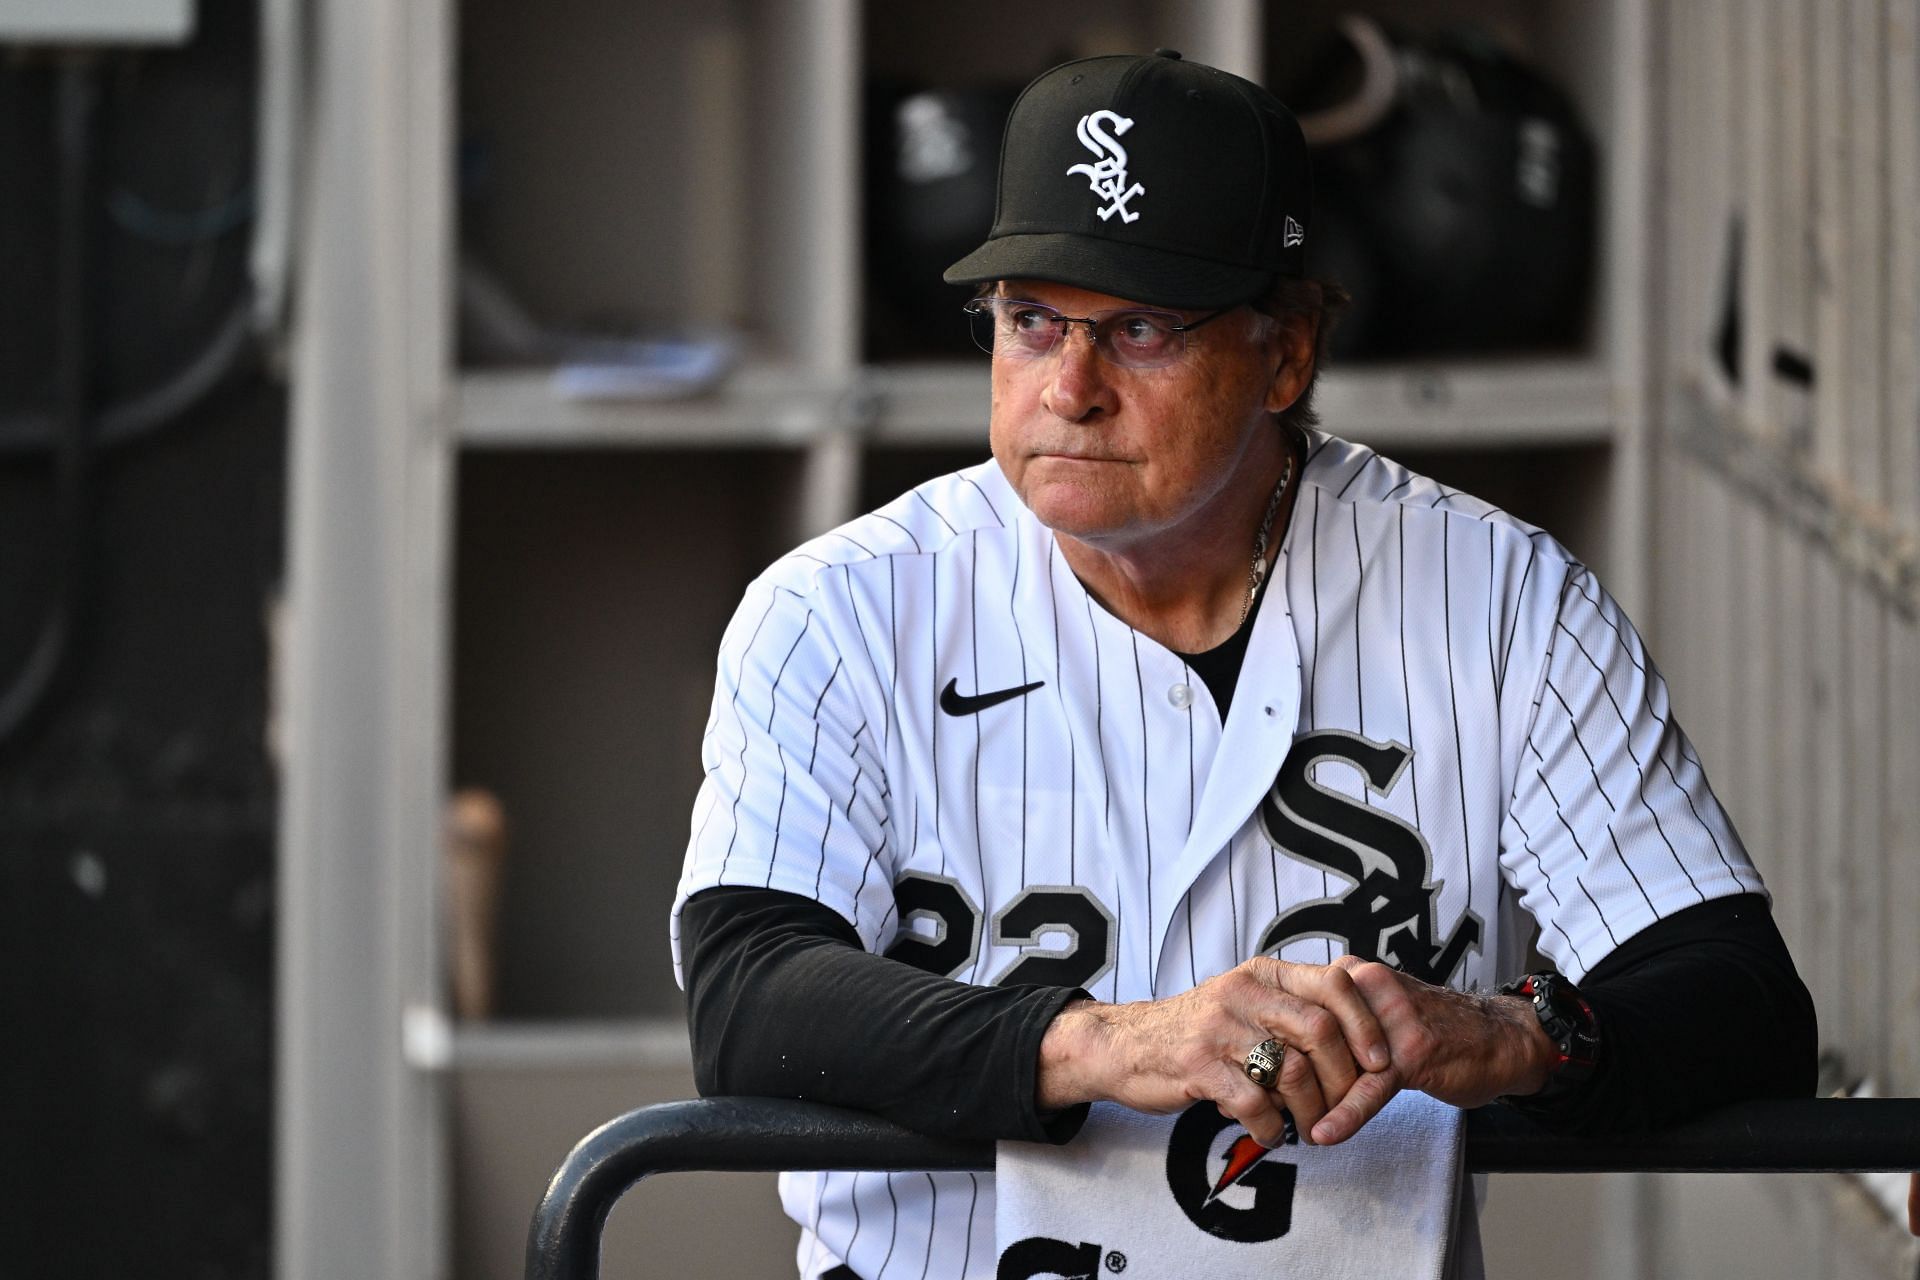 La Russa could become the first White Sox manager to get dismissed mid-season since ... La Russa.